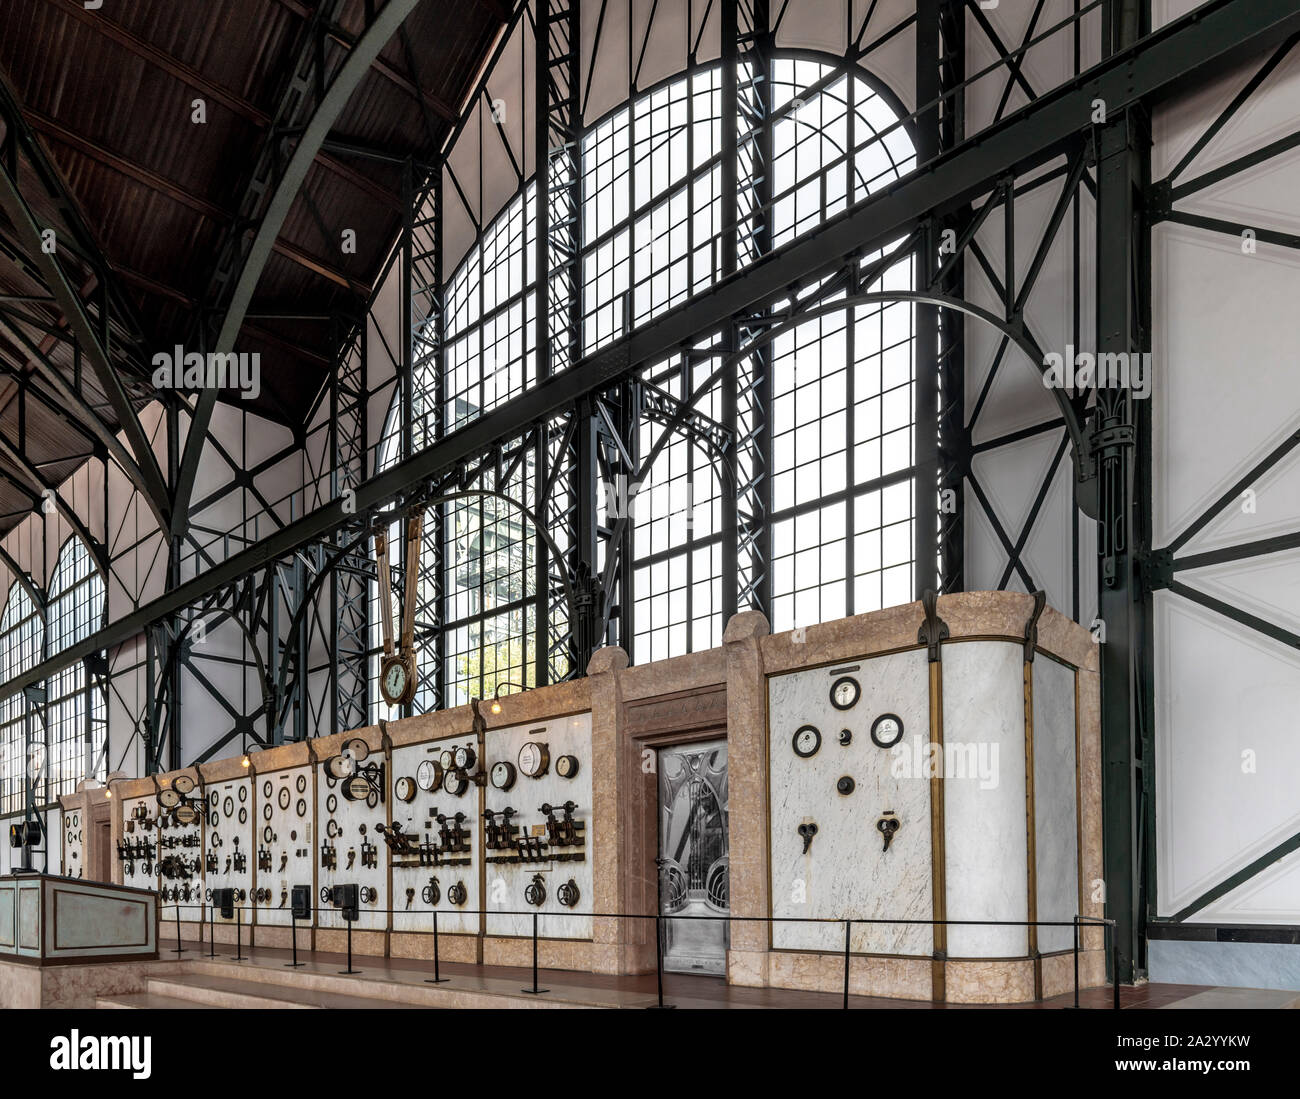 Massive Art Nouveau / Deco Engine room and colliery at LWL Industrial Museum Zollern, Dortmund, Germany Stock Photo